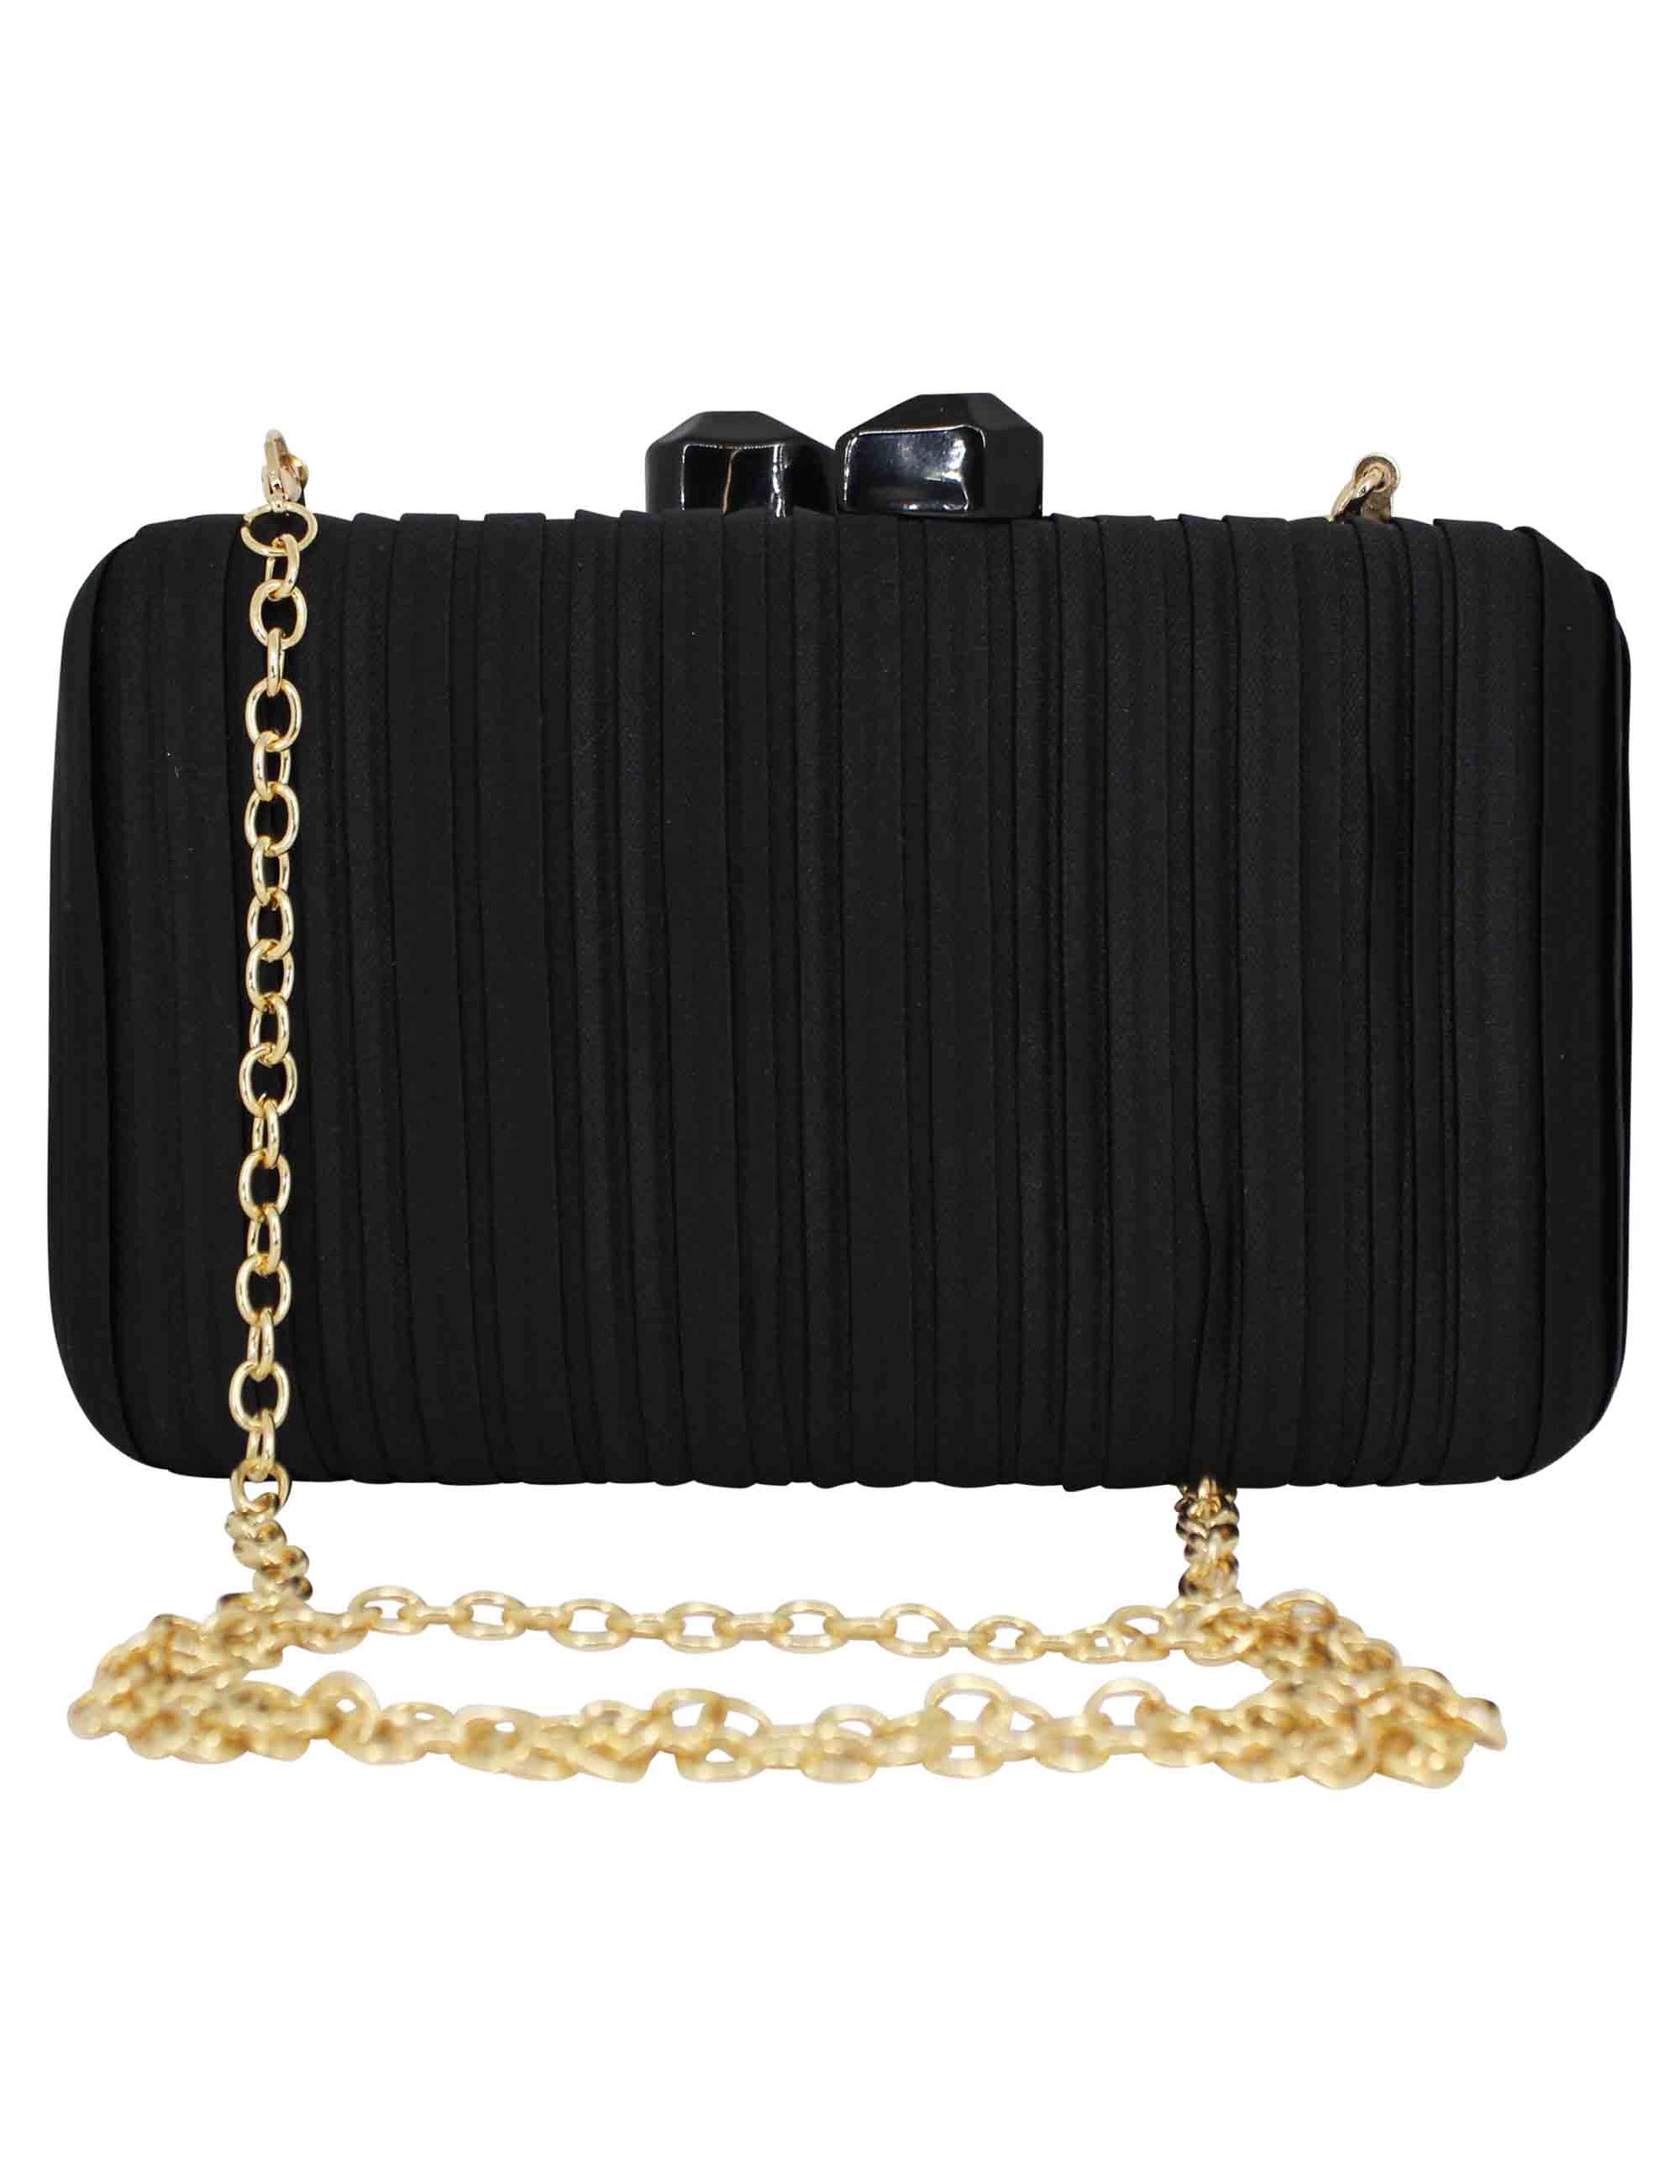 Women's clutch bags in black fabric with gold shoulder strap